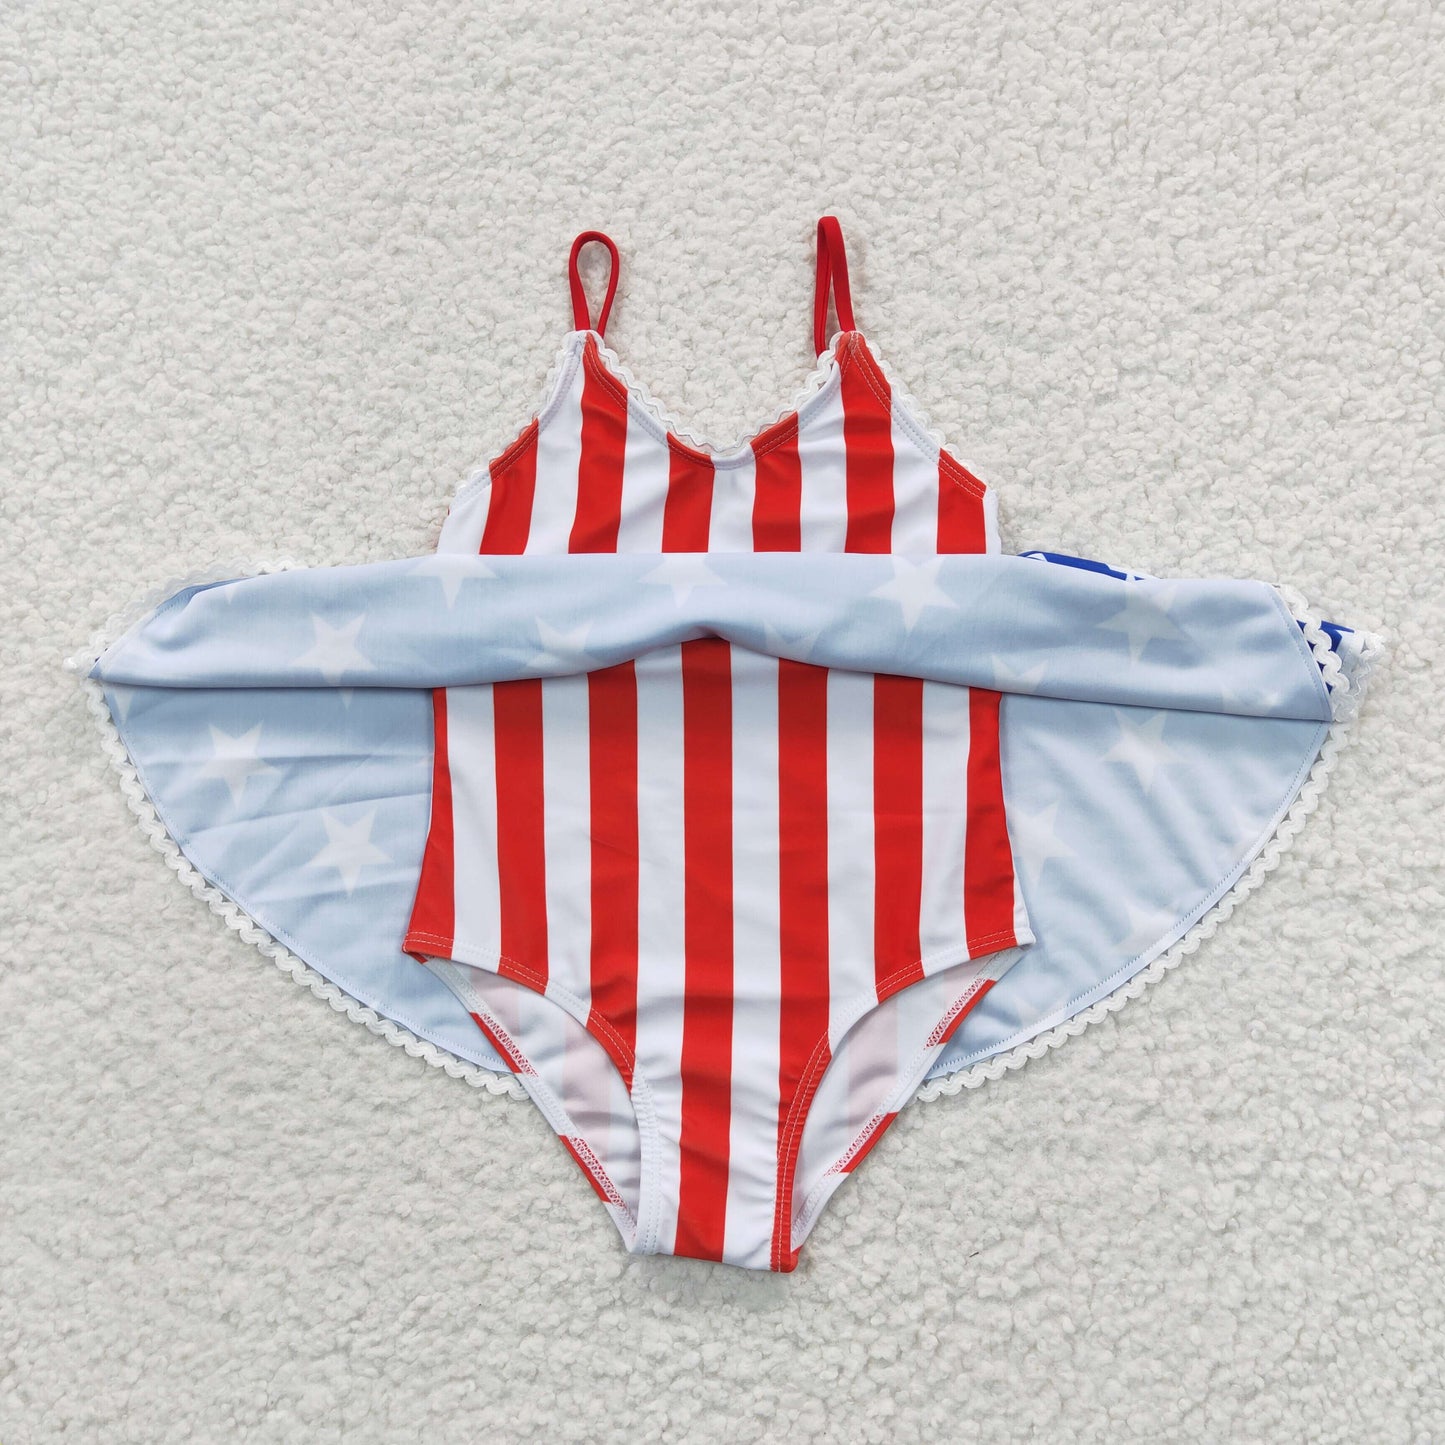 S0091 Summer Girls July 4th Swimsuit